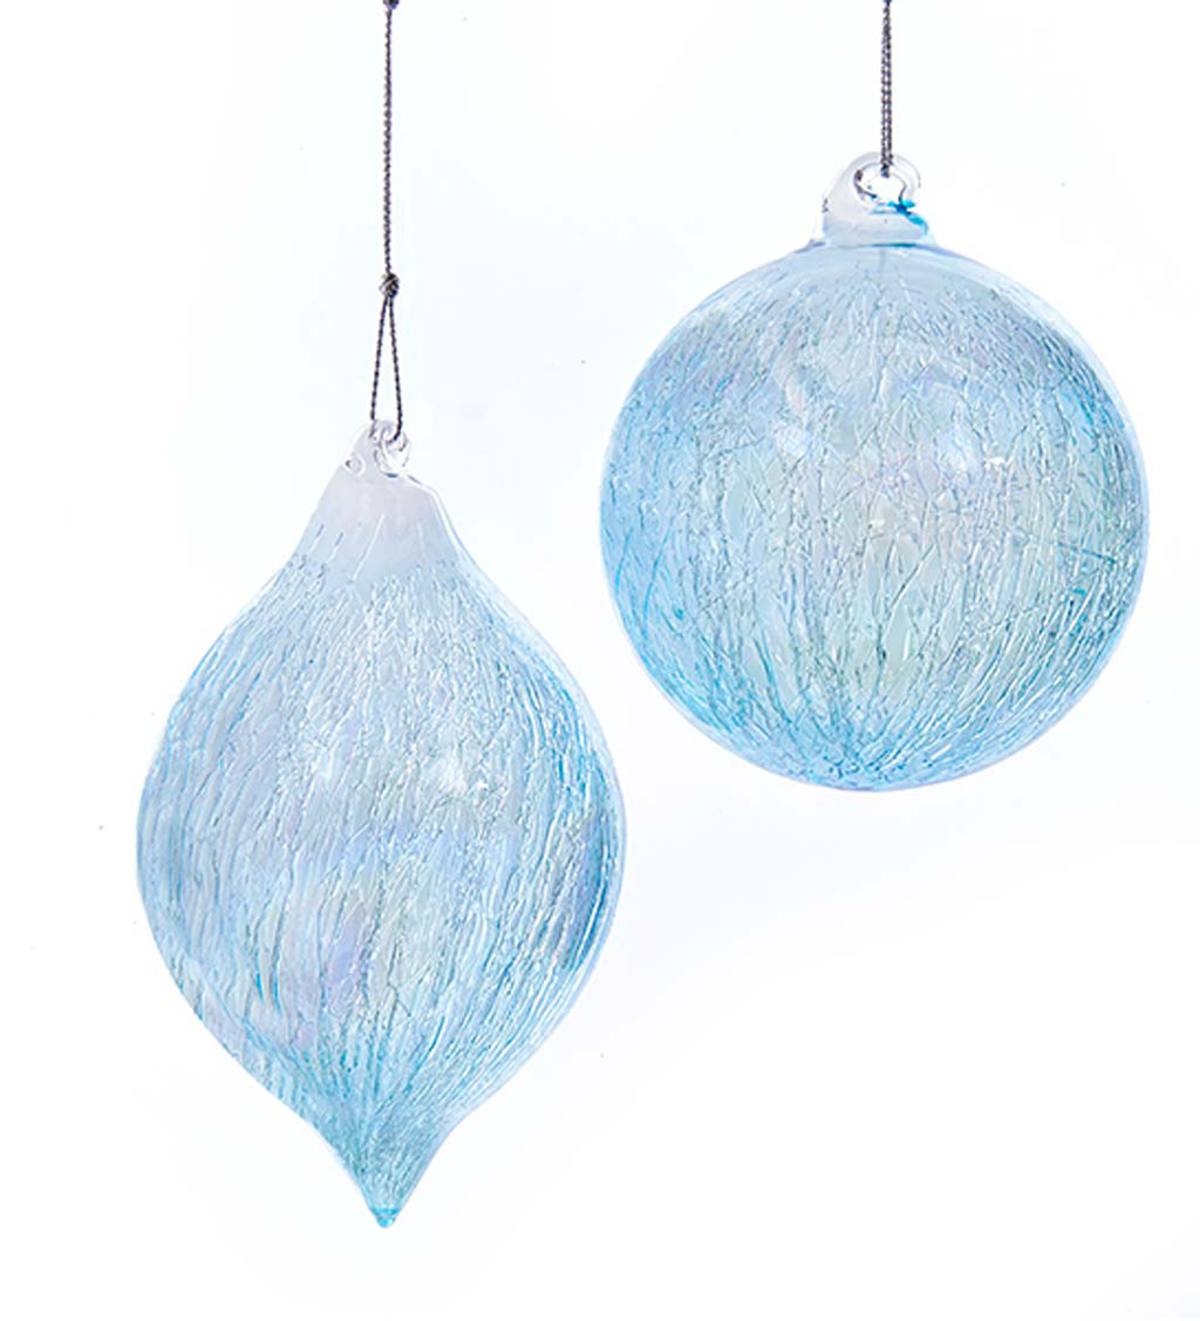 Ball and Finial Glass Ornaments, Set of 2